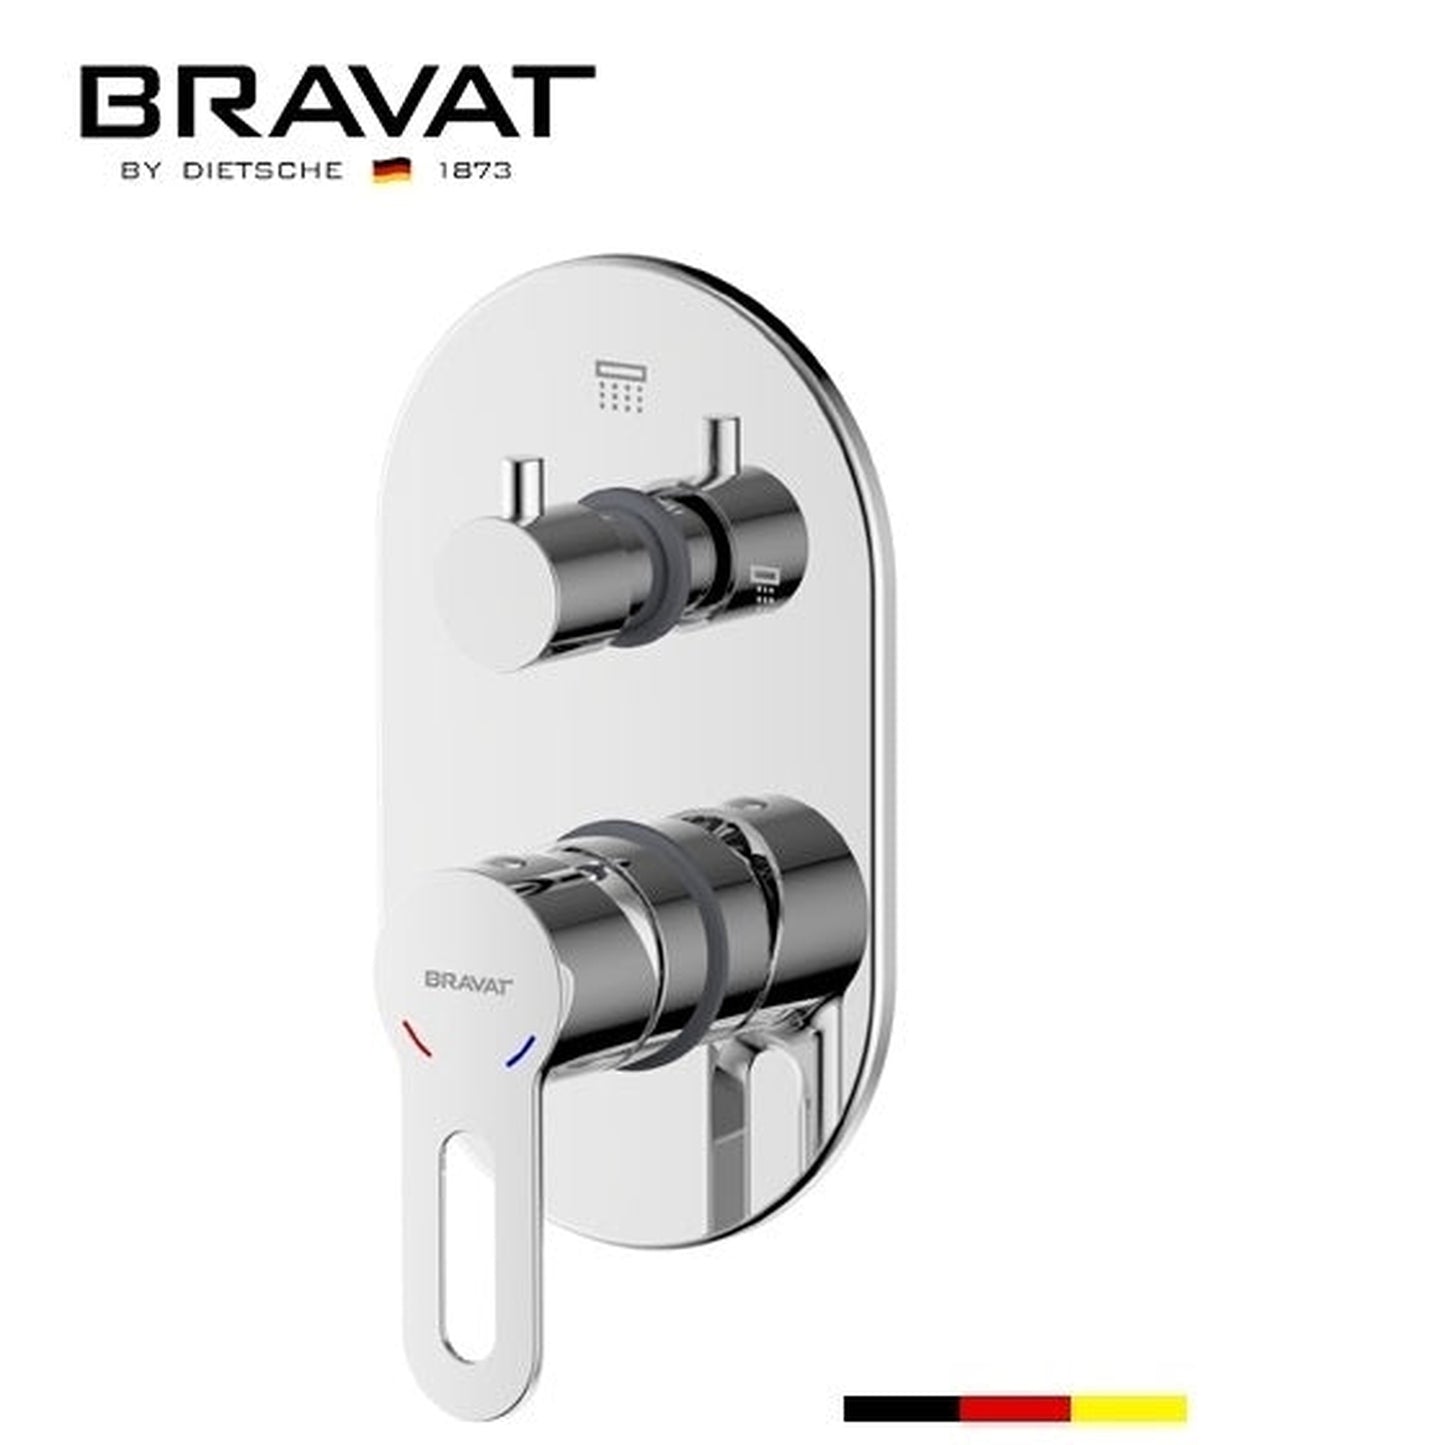 Fontana Bravat 10" Chrome Wall Mounted Thermostatic Rainfall Shower System With 3-Jet Body Sprays and Hand Shower